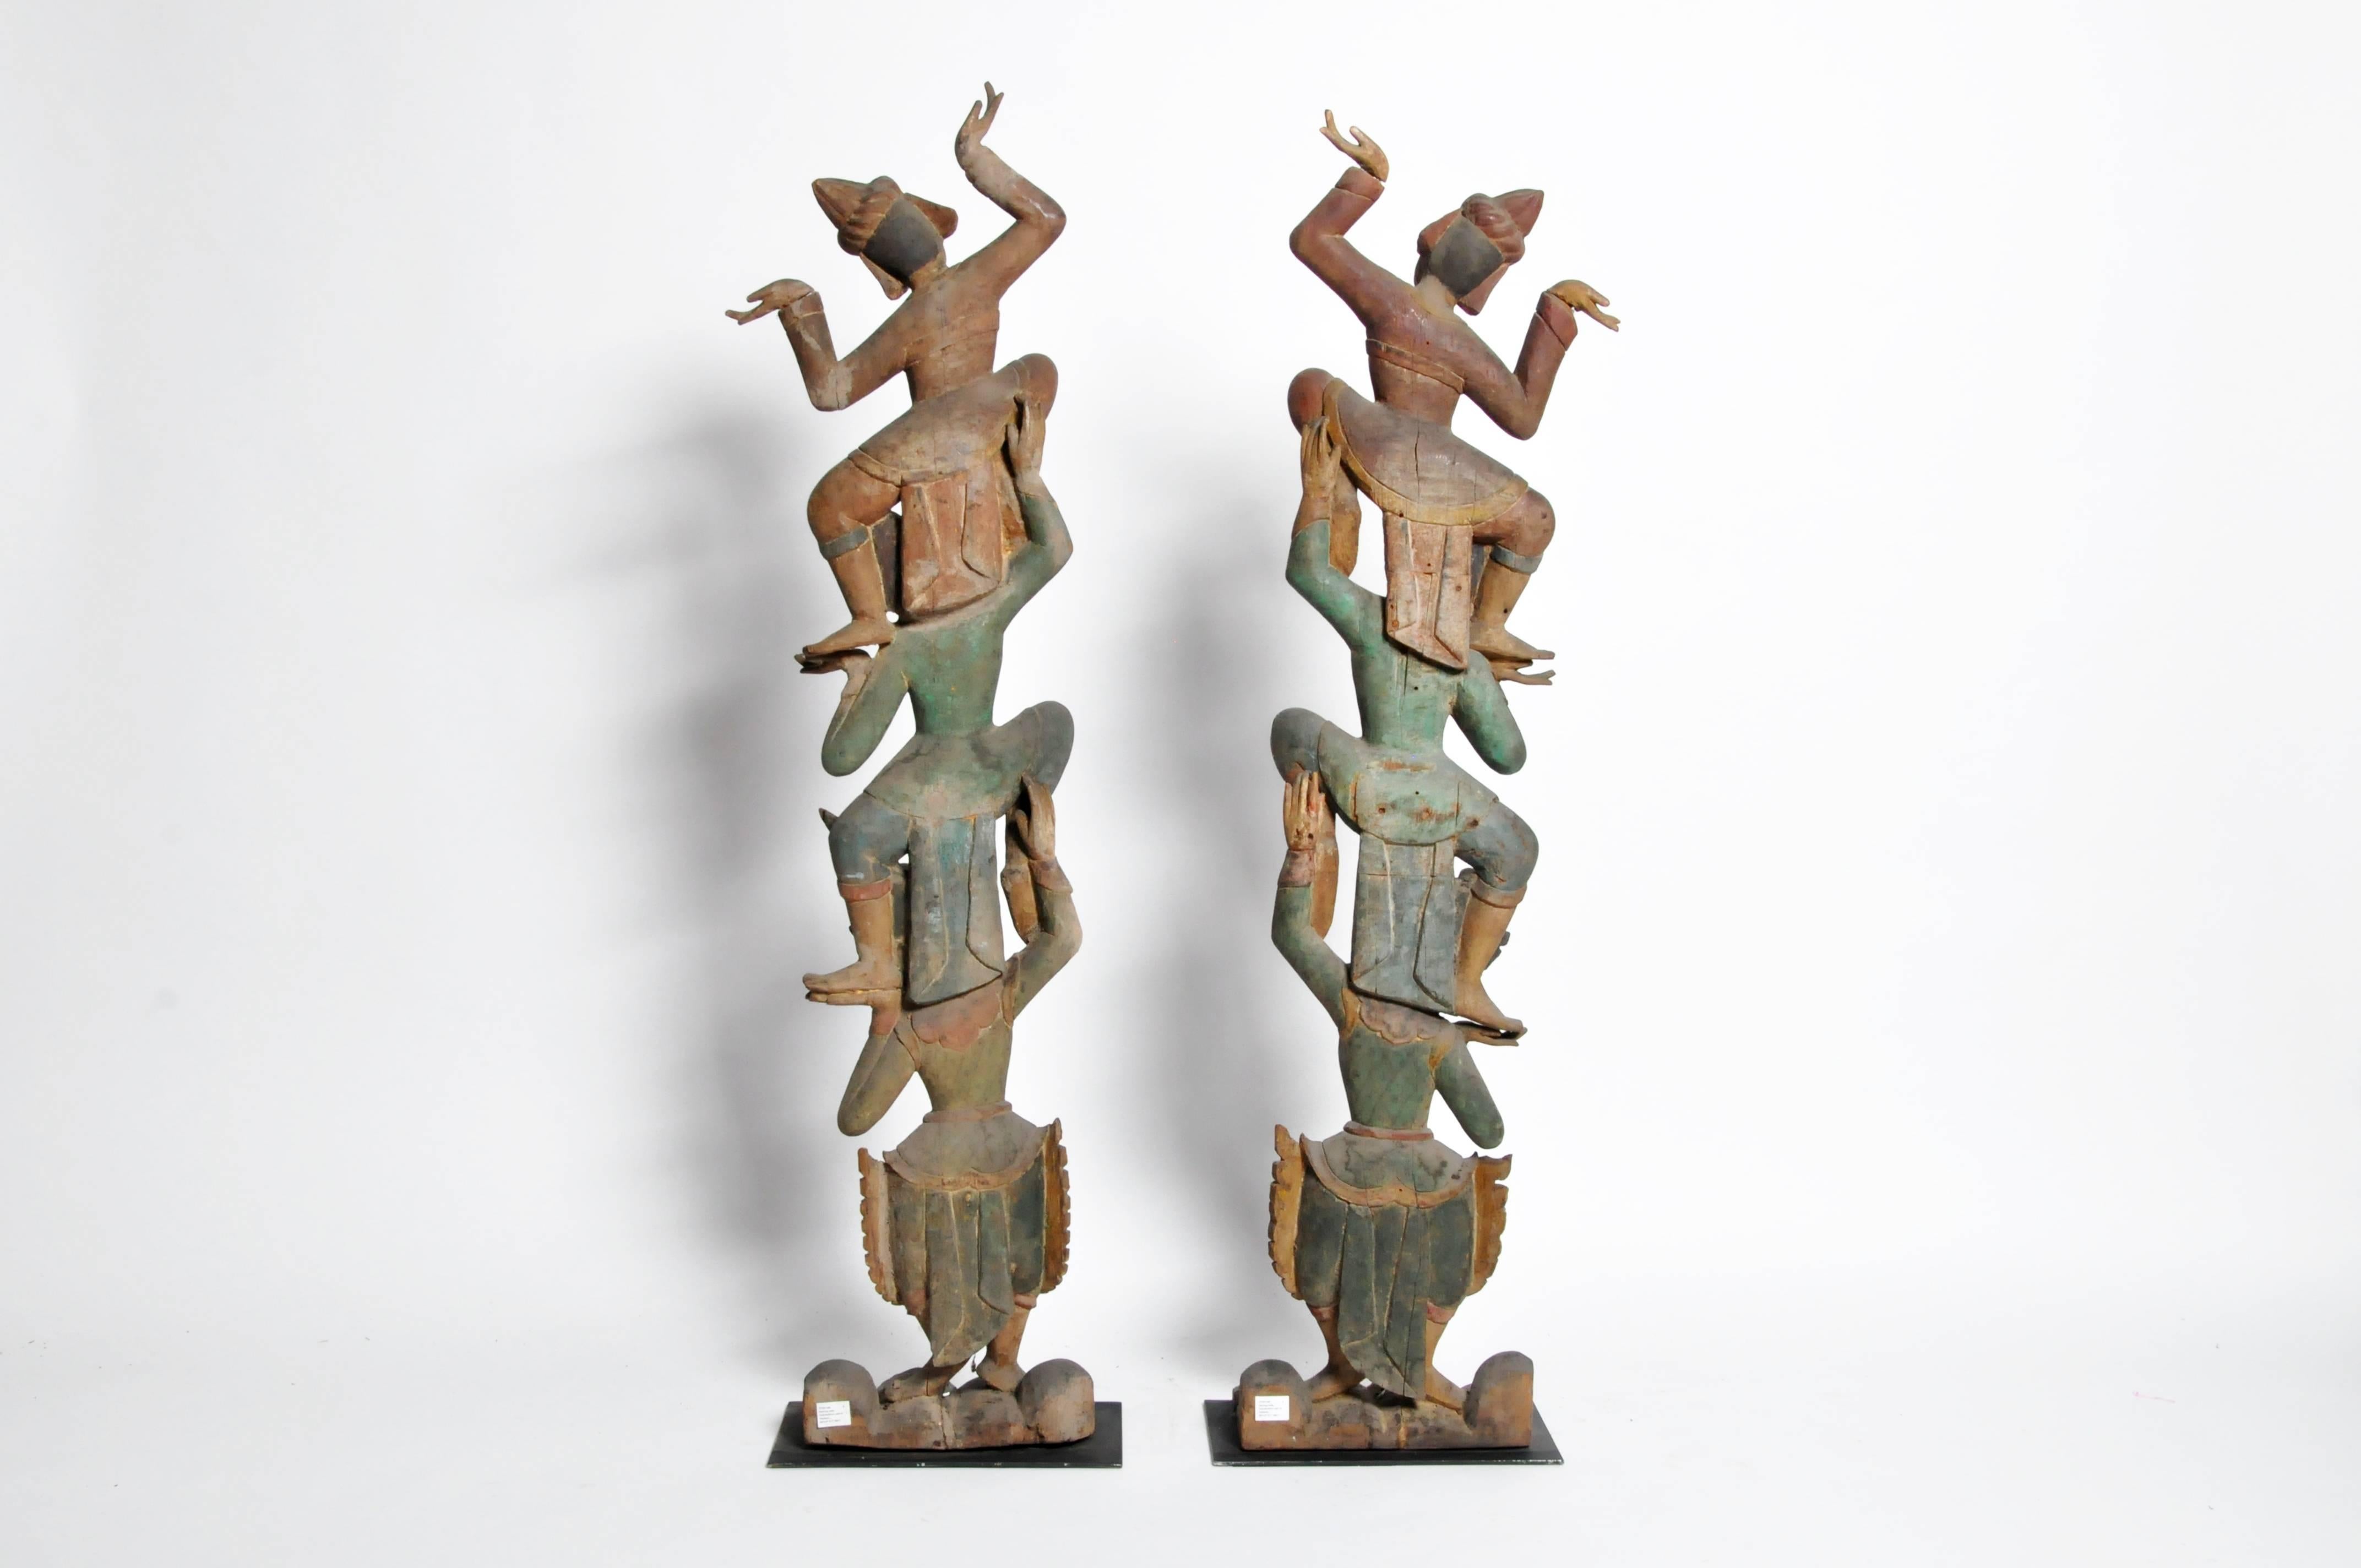 These handsome hand-carved Thai dancers are from Chiang Mai, Thailand, circa late 20th century. Carved from teak wood they have been mounted on a metal base for display.